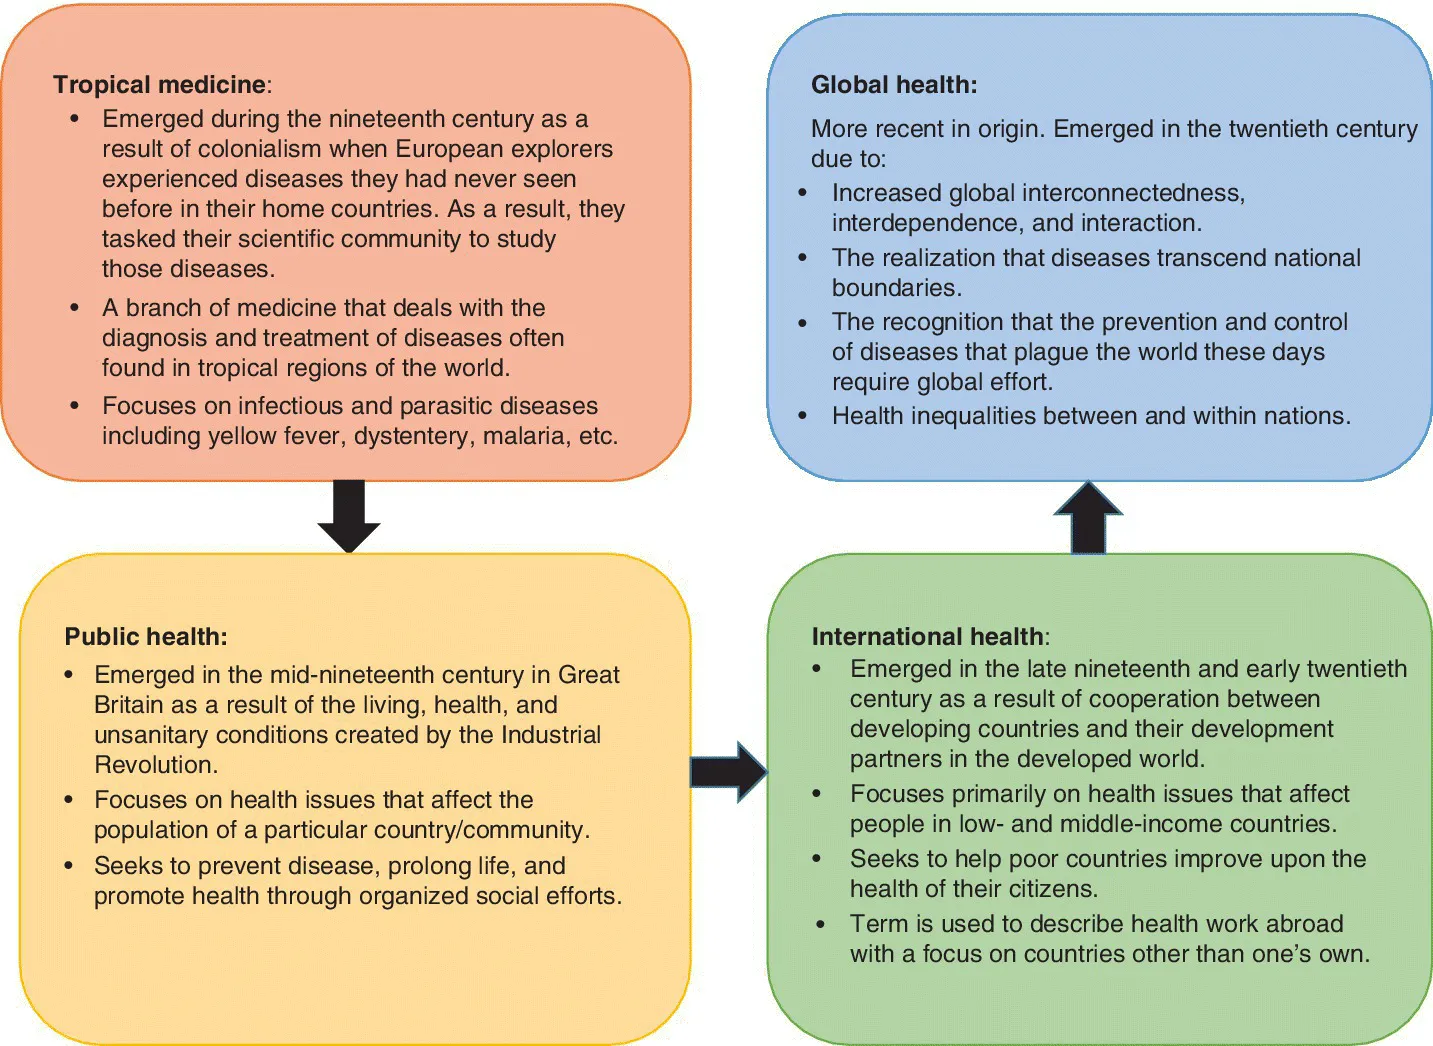 Flow diagram illustrating health-related fields prior to global heath, displaying 4 boxes being linked by arrows starting from tropical medicine to public health, to international health, and to global health.